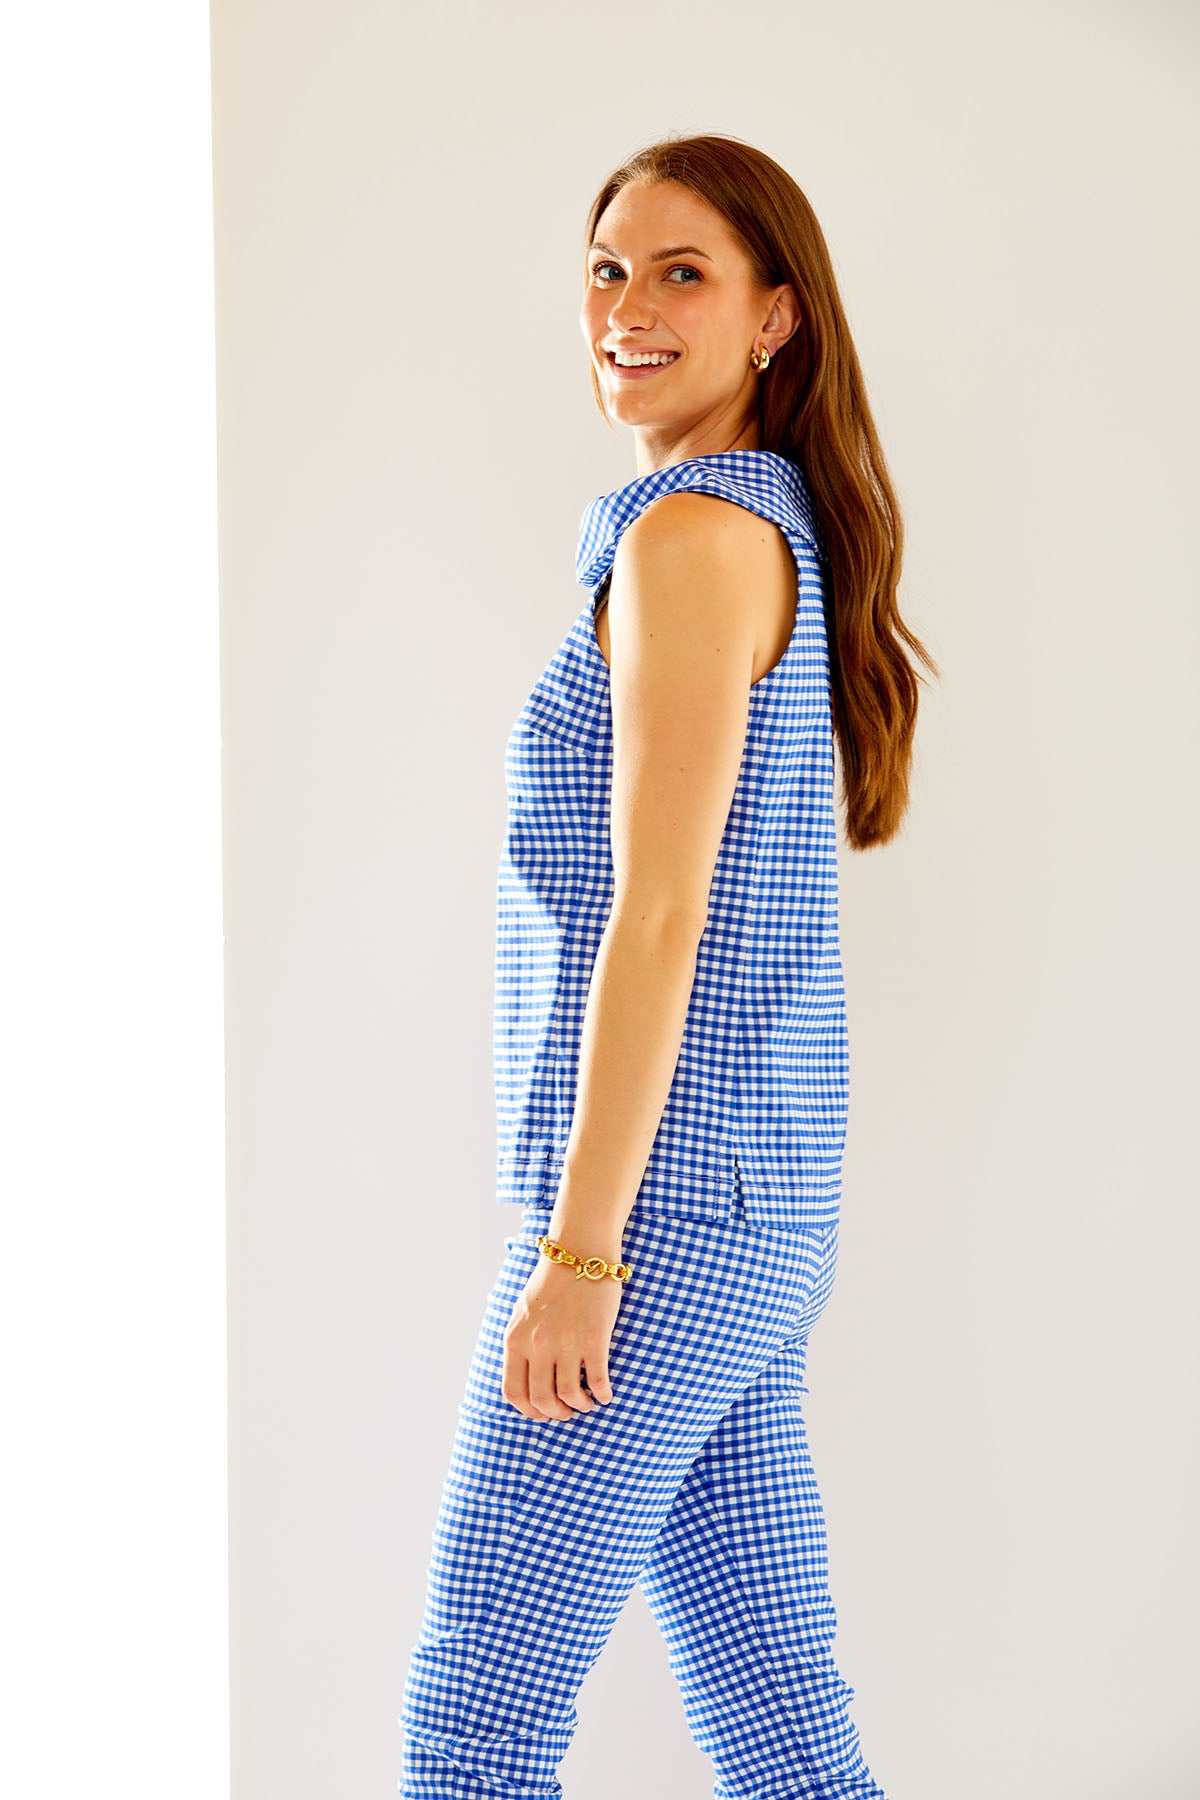 Woman in blue and white gingham top